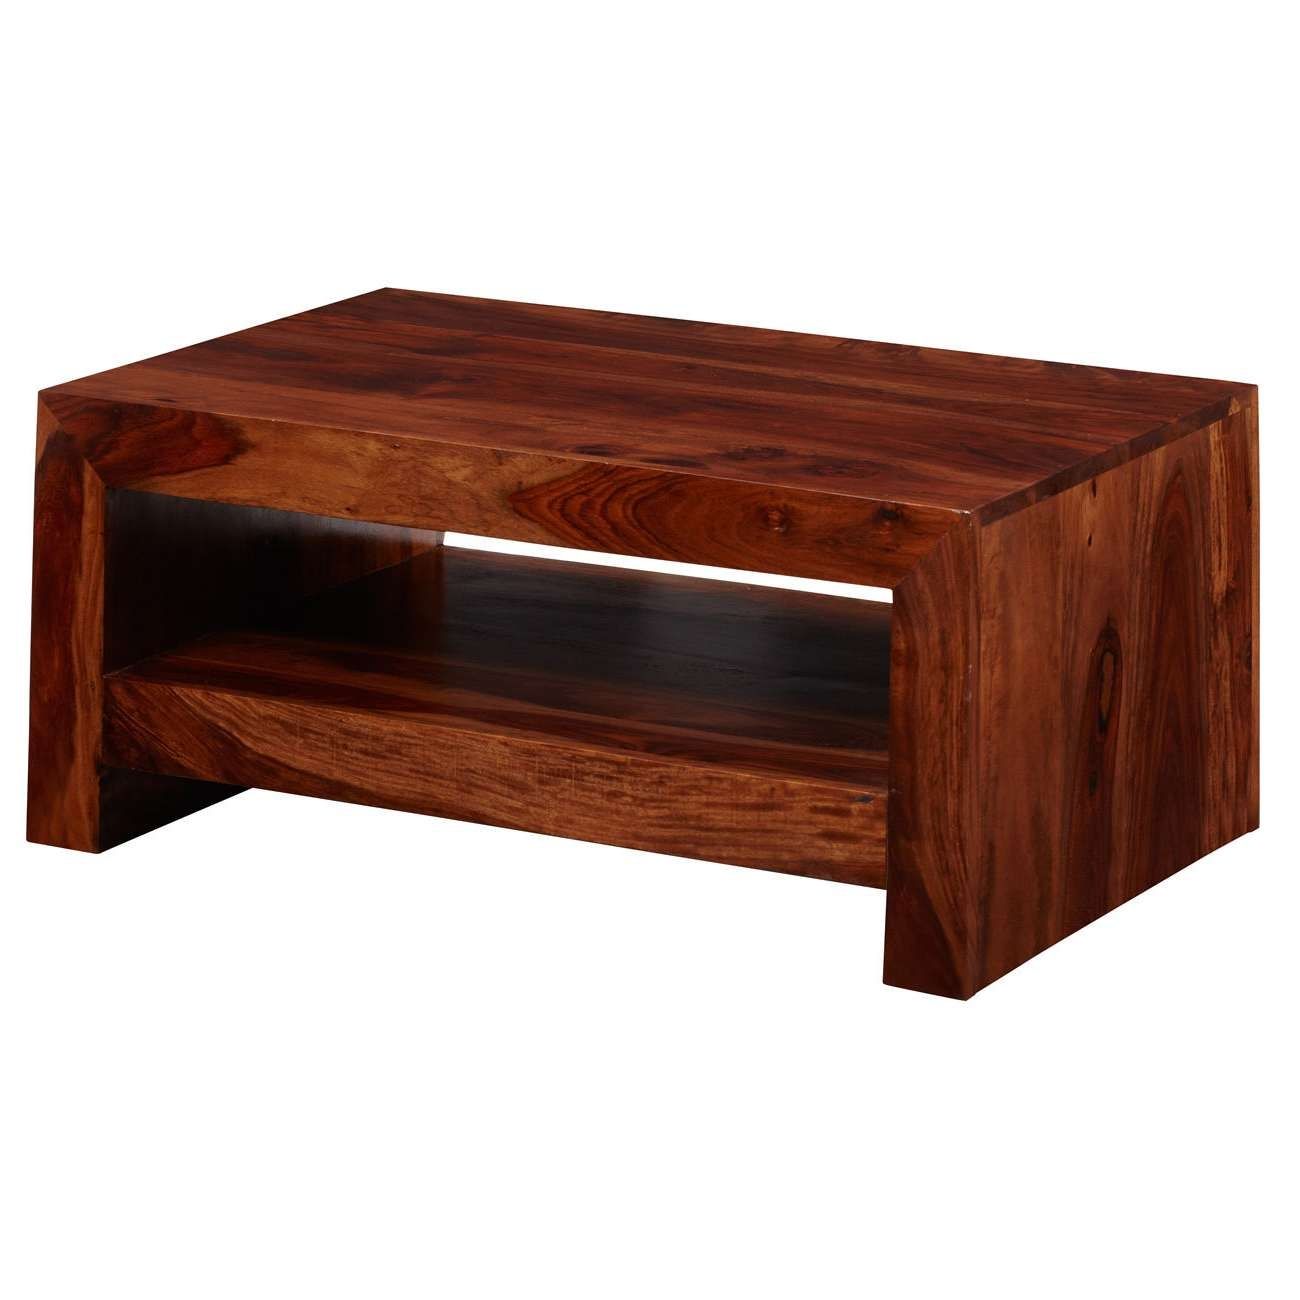 Fashionable Dark Wood Coffee Tables With Regard To Coffee Table (View 7 of 20)